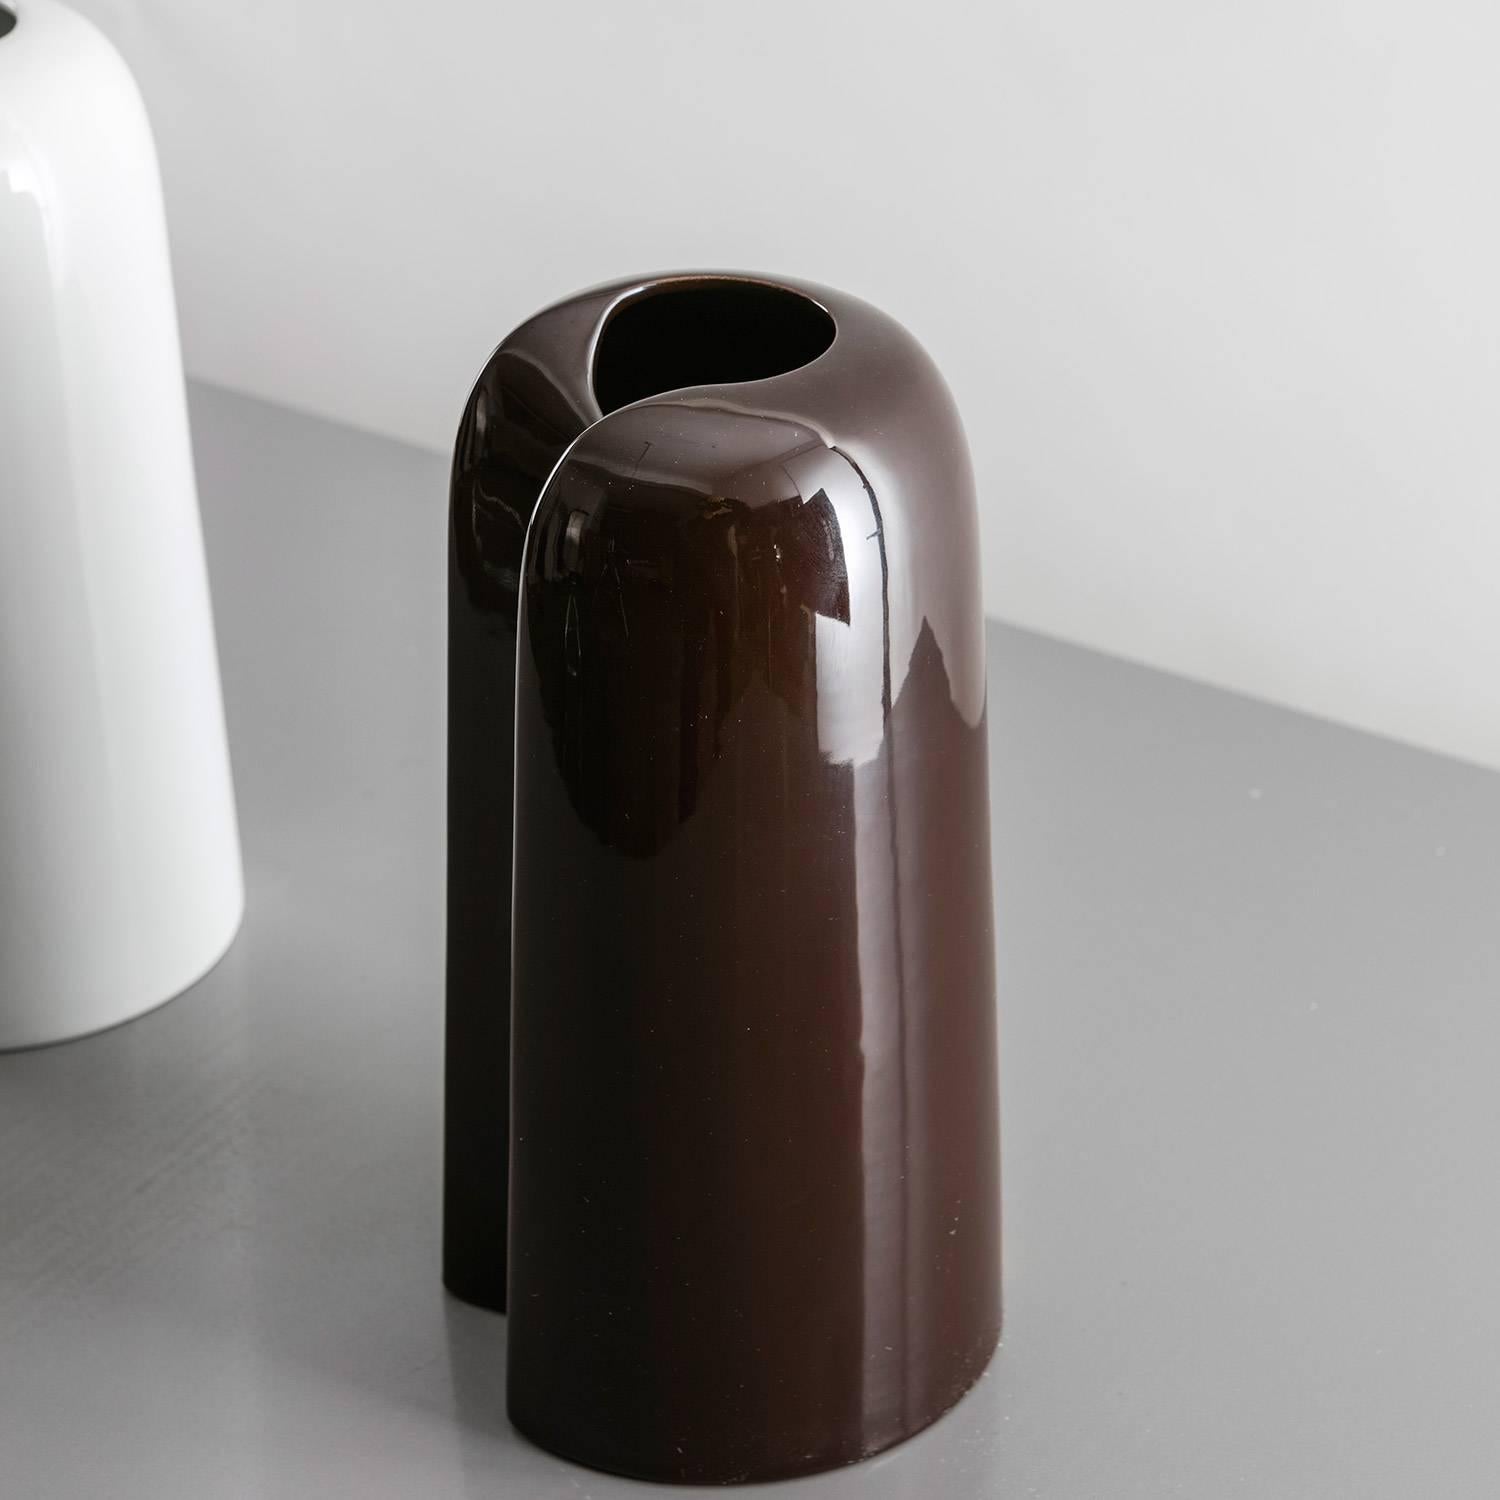 Remarkable set of three ceramic vases designed by Ambrogio Pozzi for Ceramiche Franco Pozzi.
Flat rectangular shapes joined with soft curves that contrast with the asymmetrical groove located on the side.
Size refers to the biggest piece.